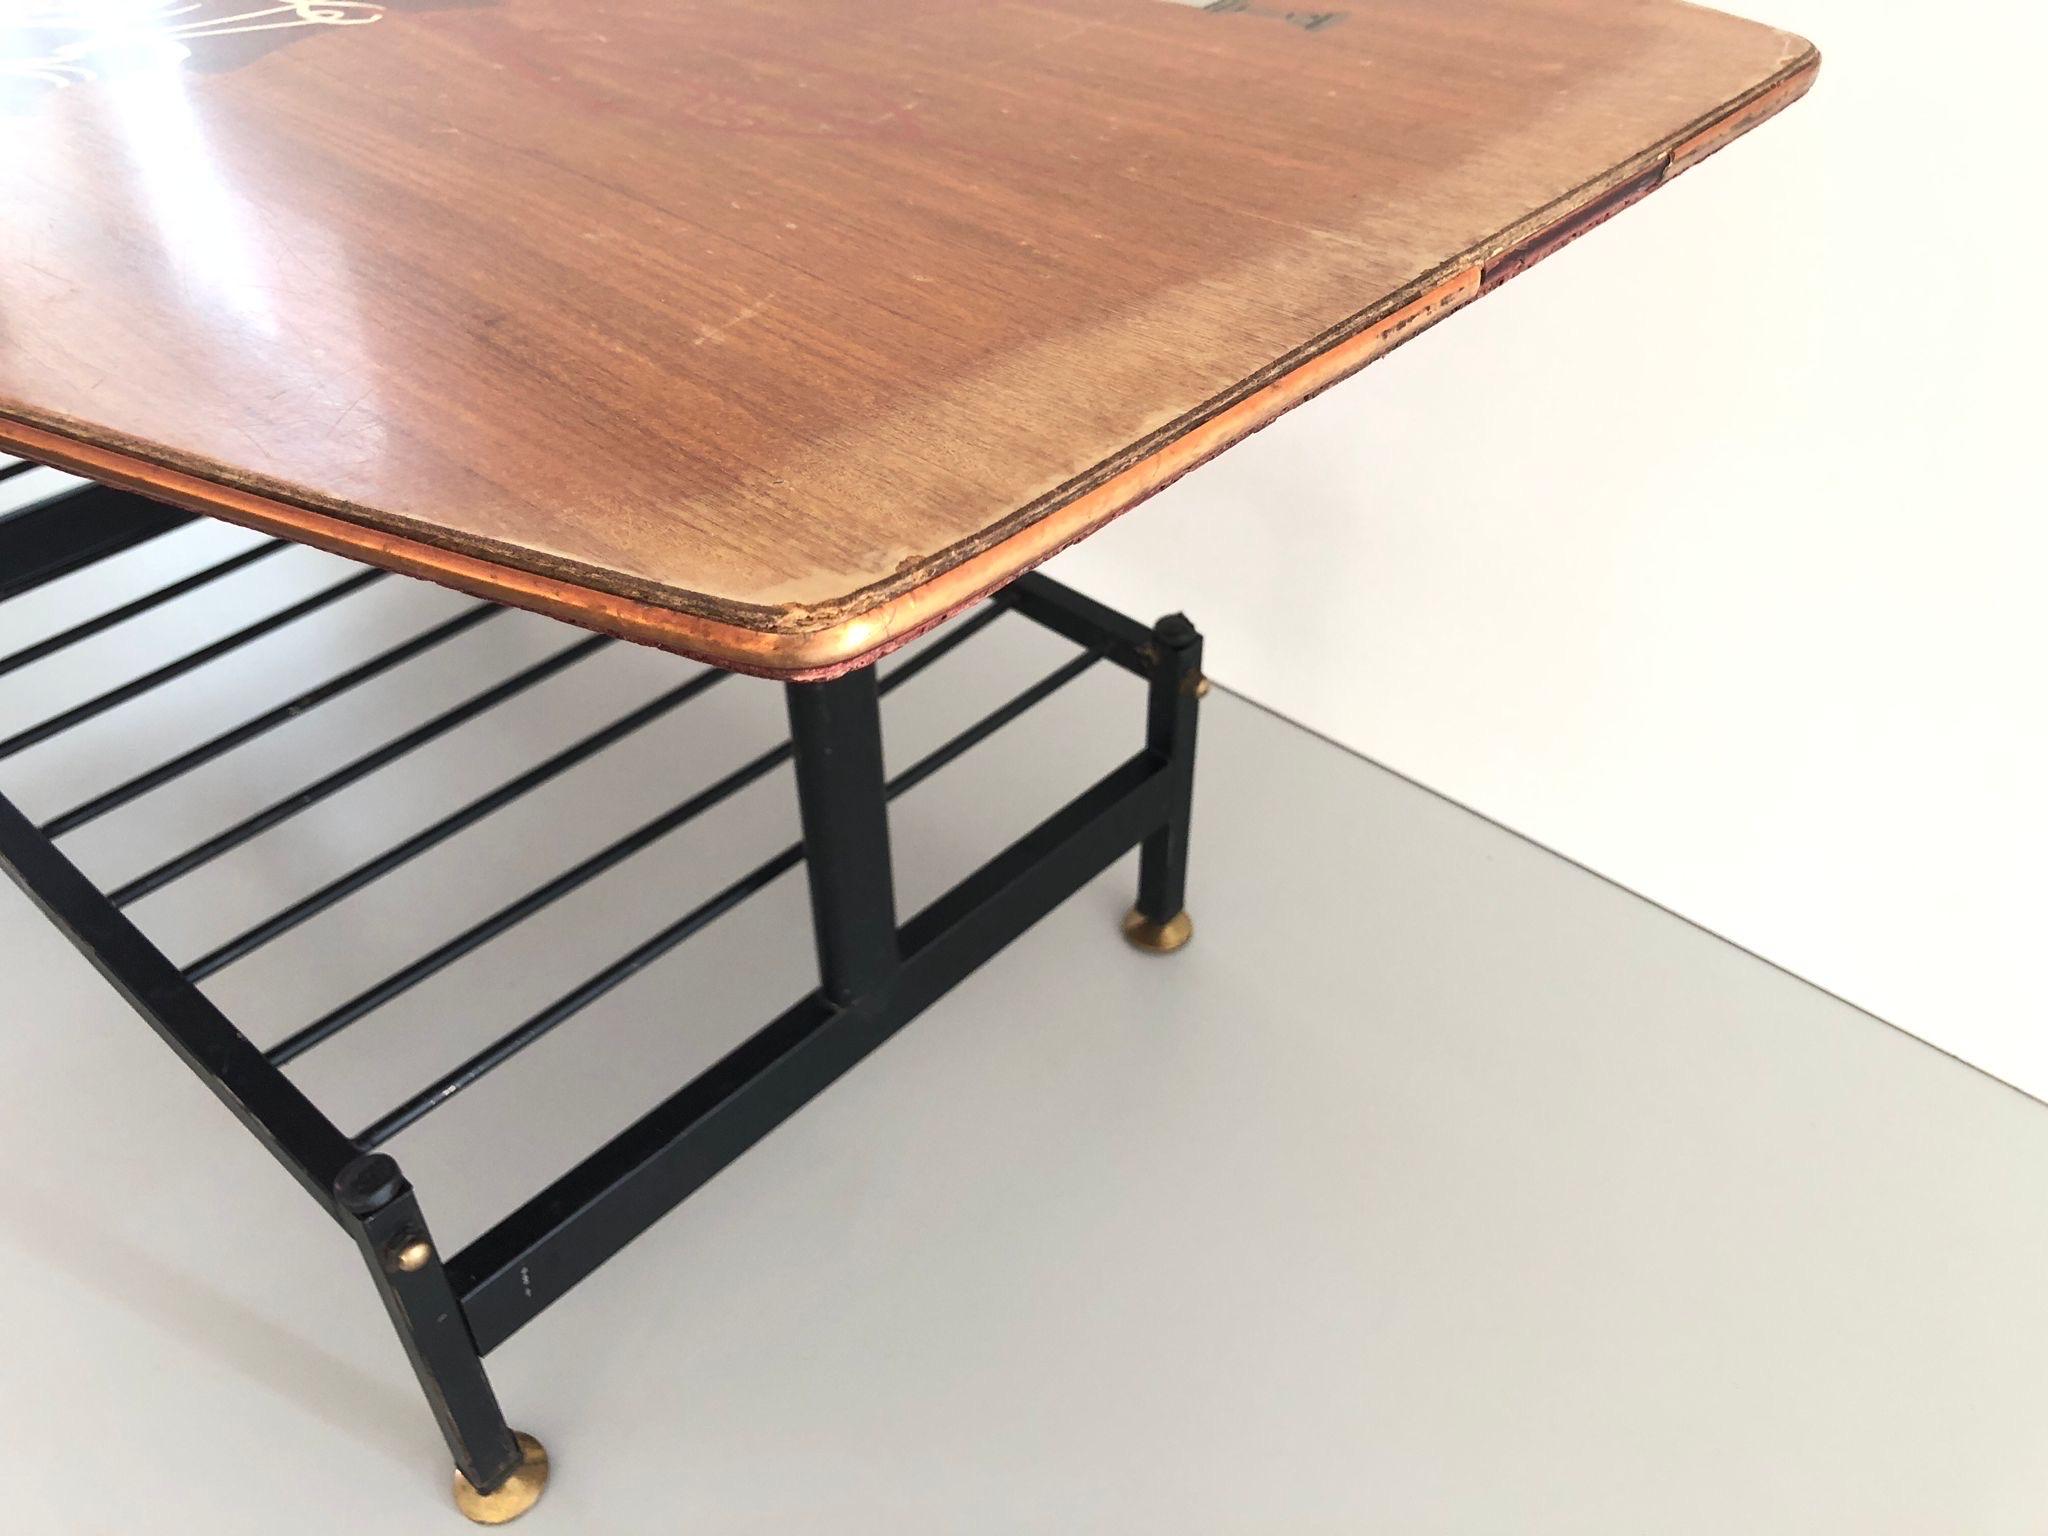 Mid-Century Modern Hand-painted Illustrated Wood Coffee or Center Table, 1950s, Italy For Sale